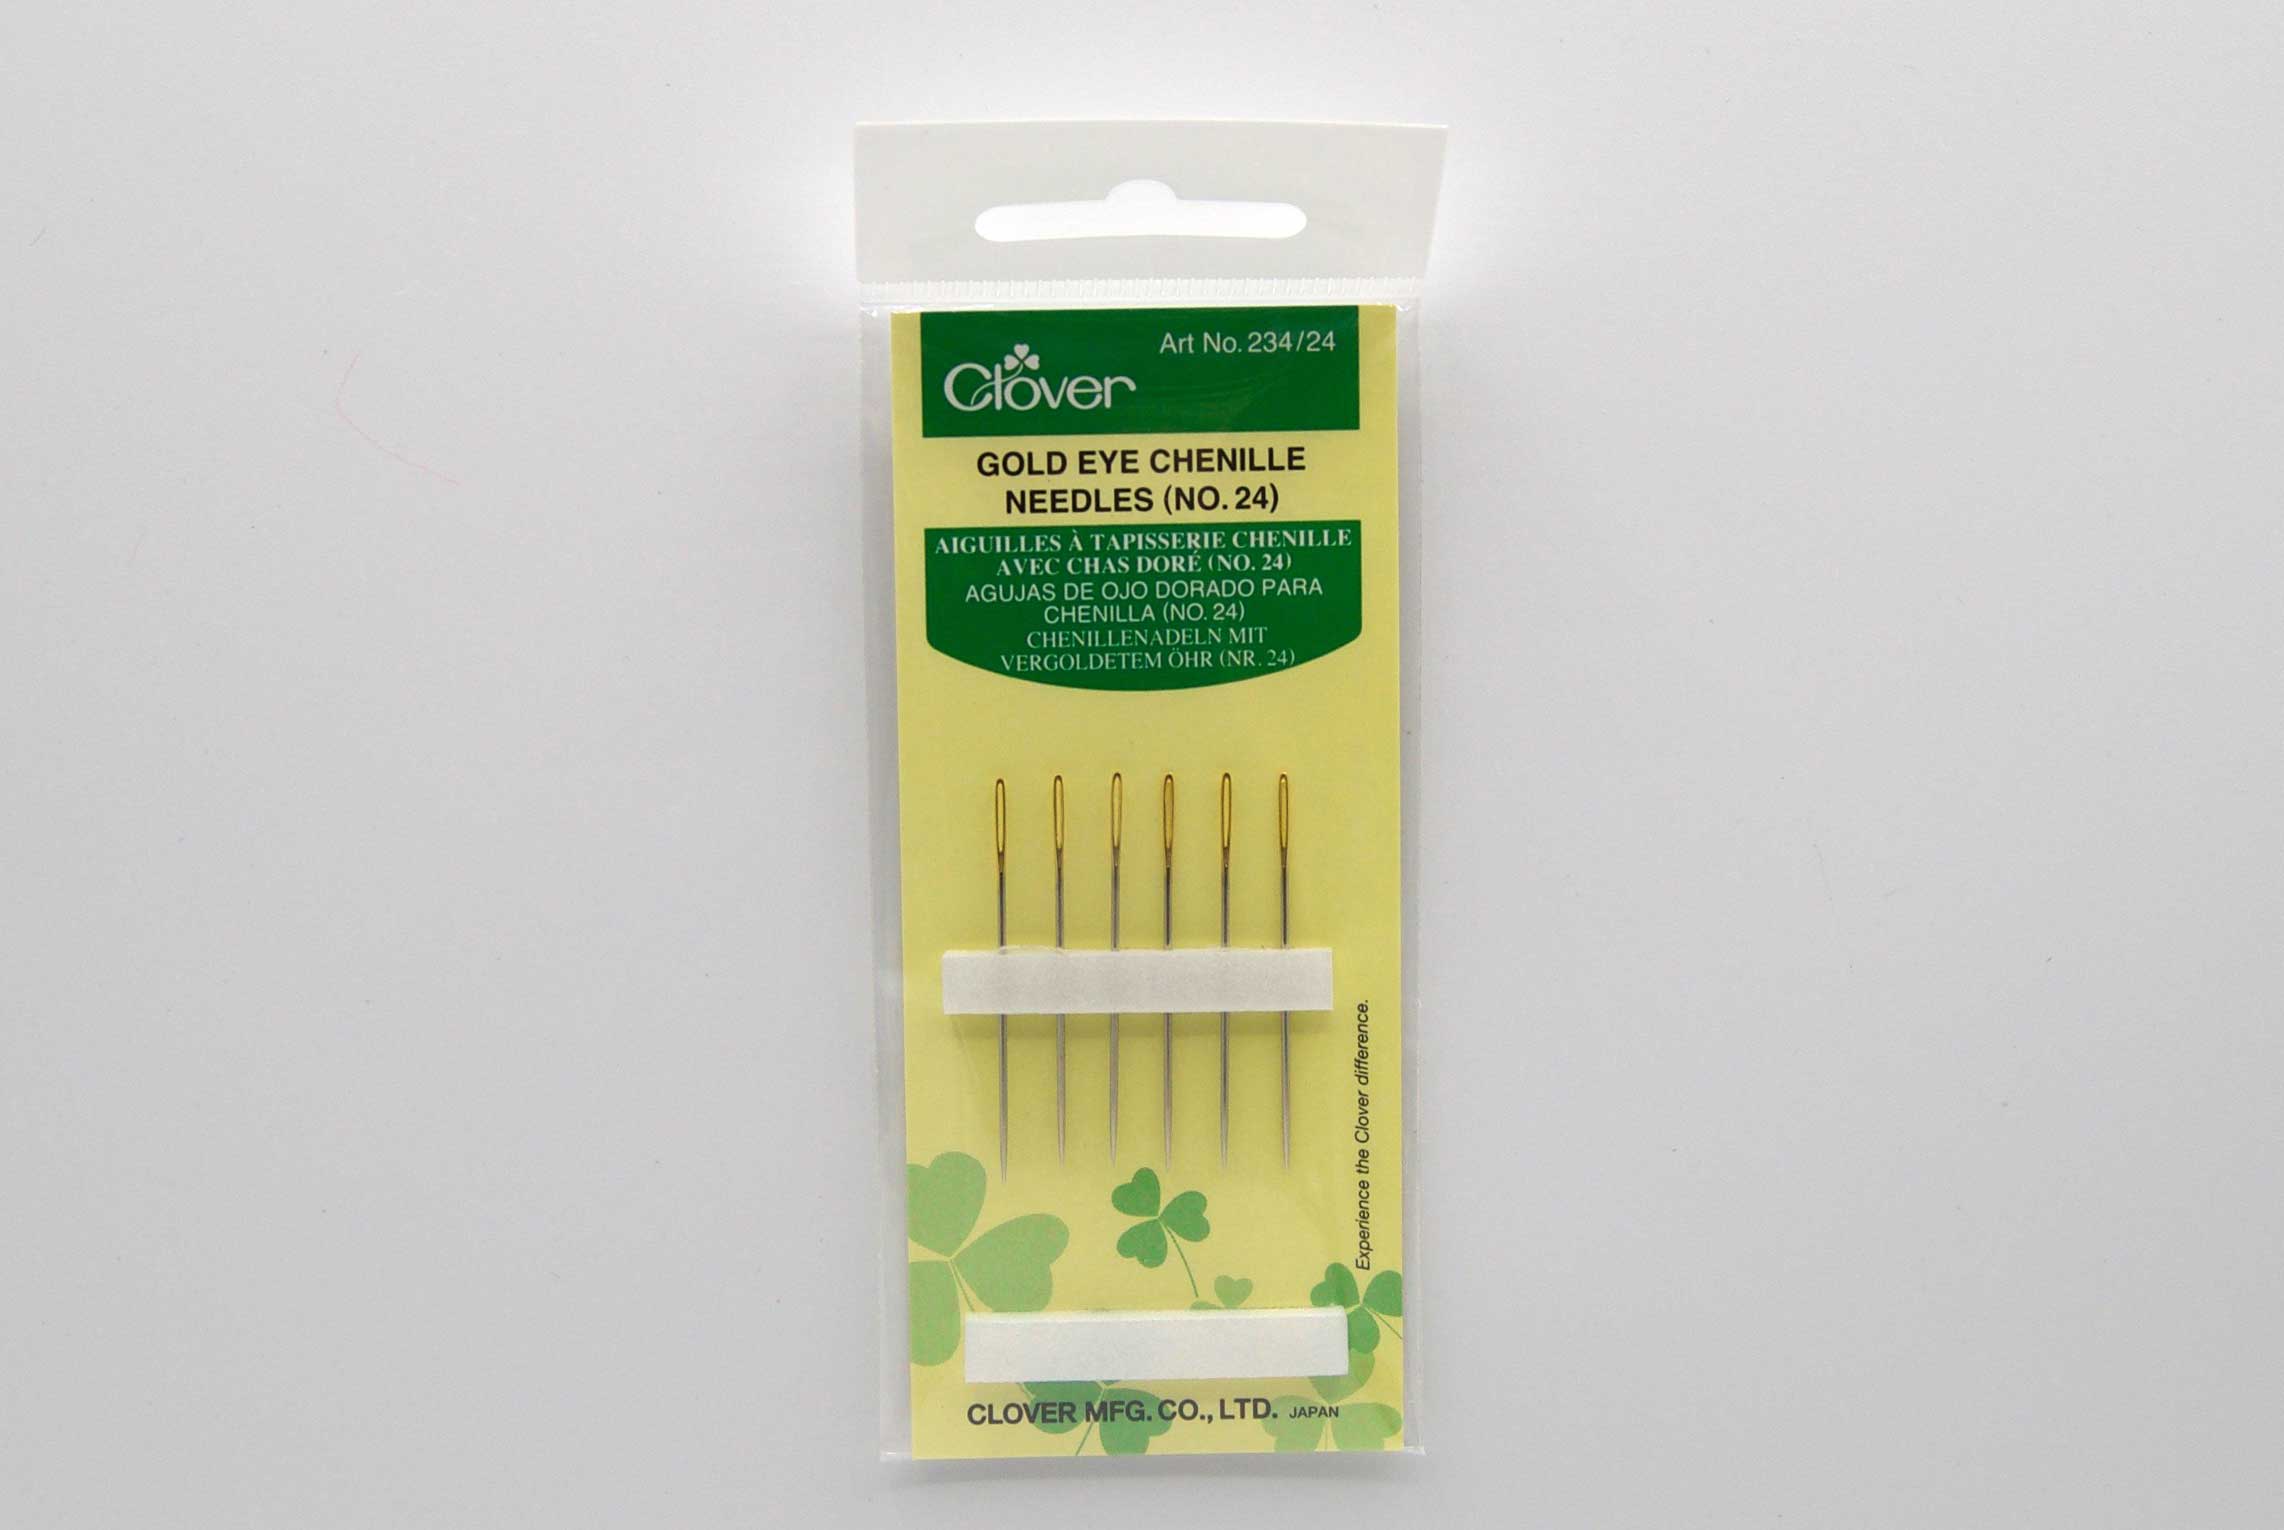 Sewing and Cross Stitch Needles Size 24 • PAPER SCISSORS STONE